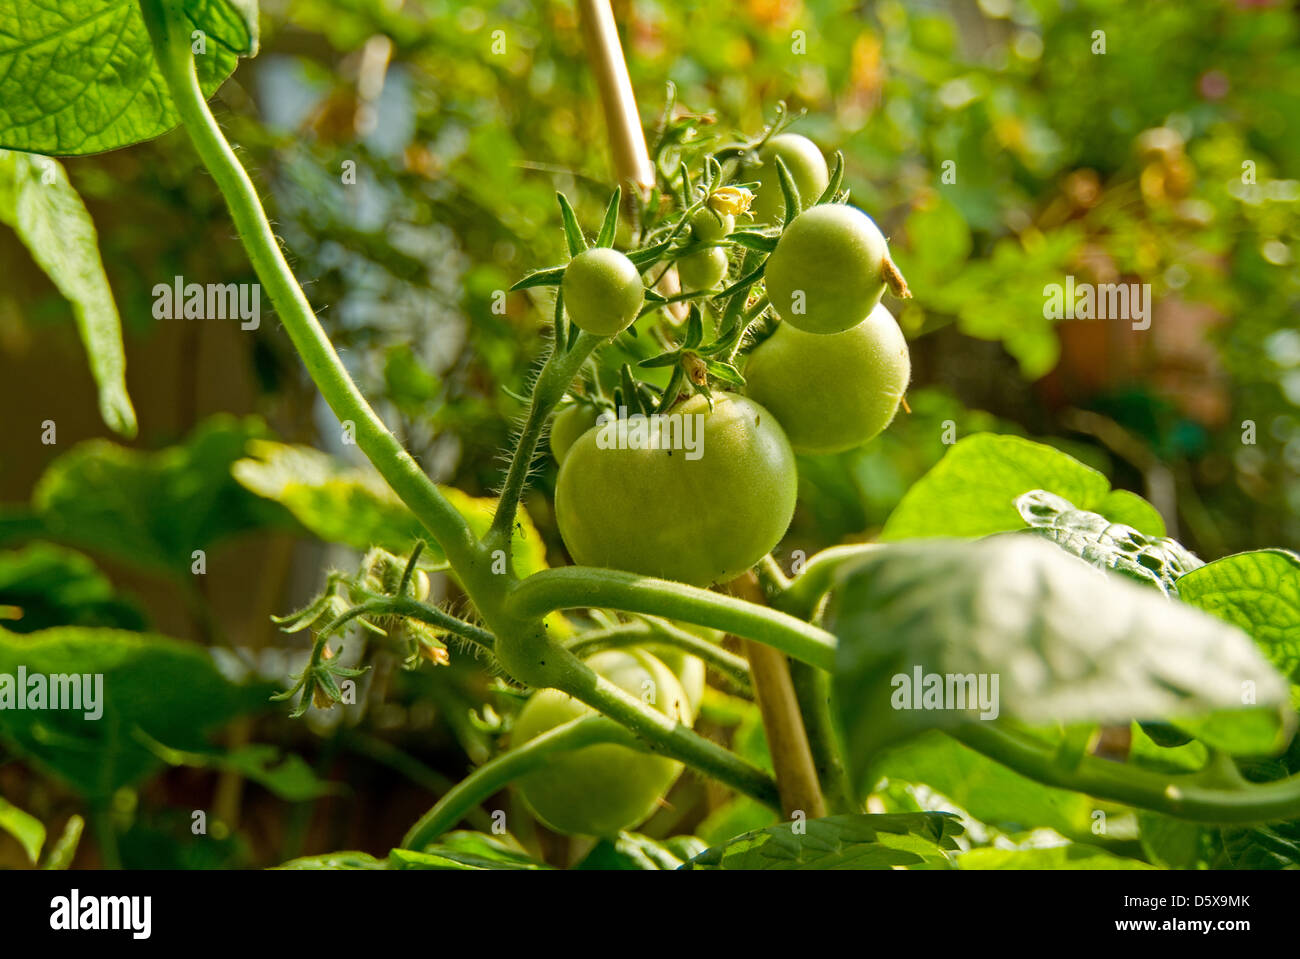 Fried Green Tomatoes Stock Photo